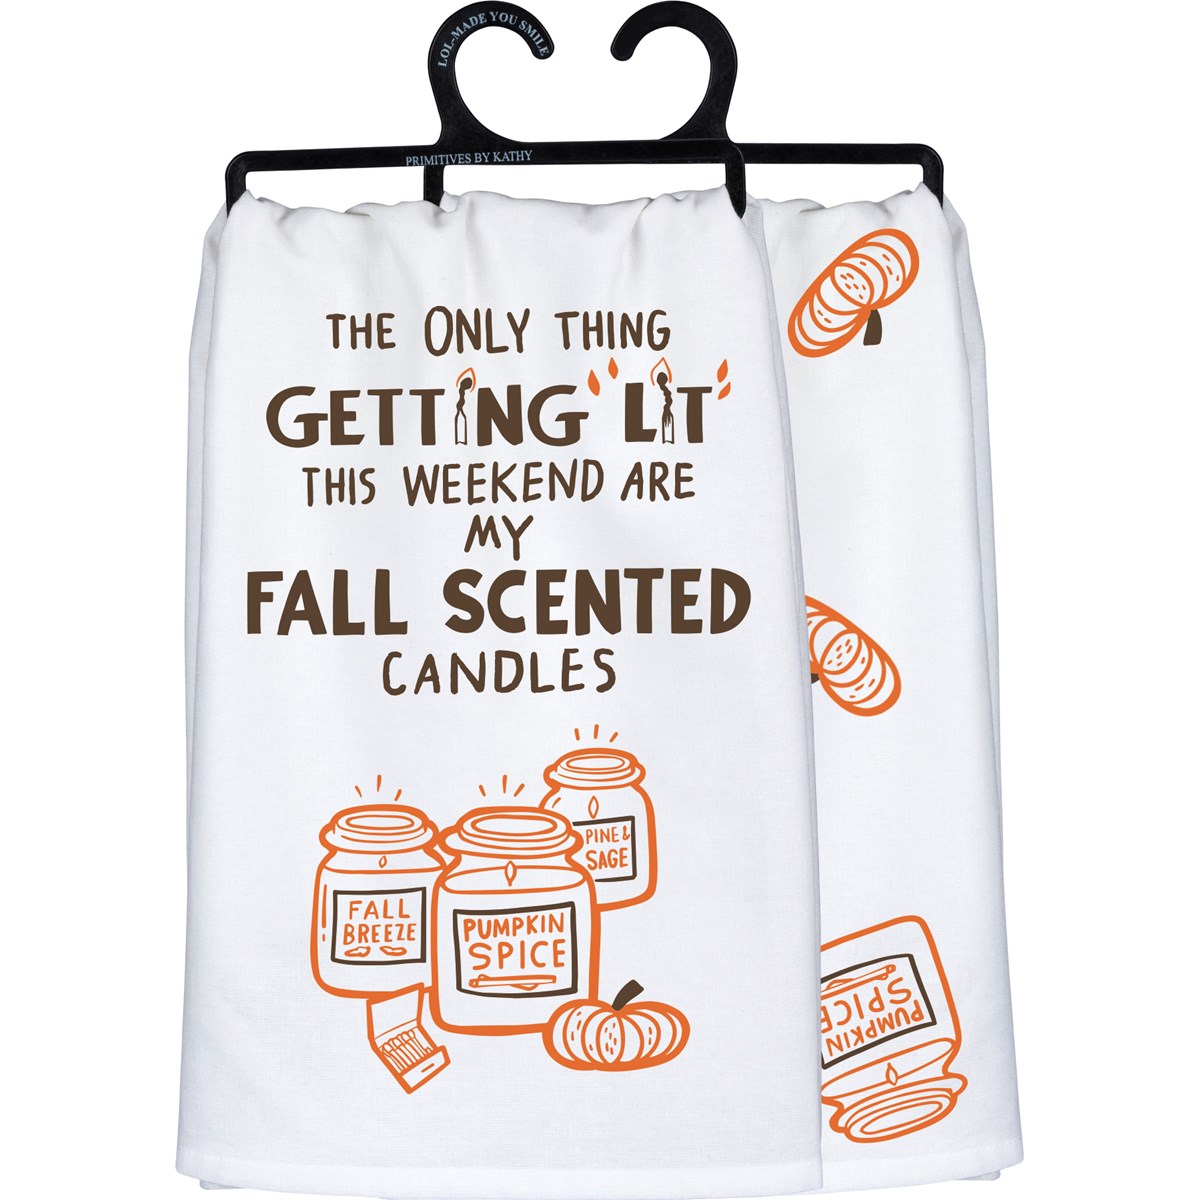 My Fall Scented Candles Kitchen Towel - Cotton